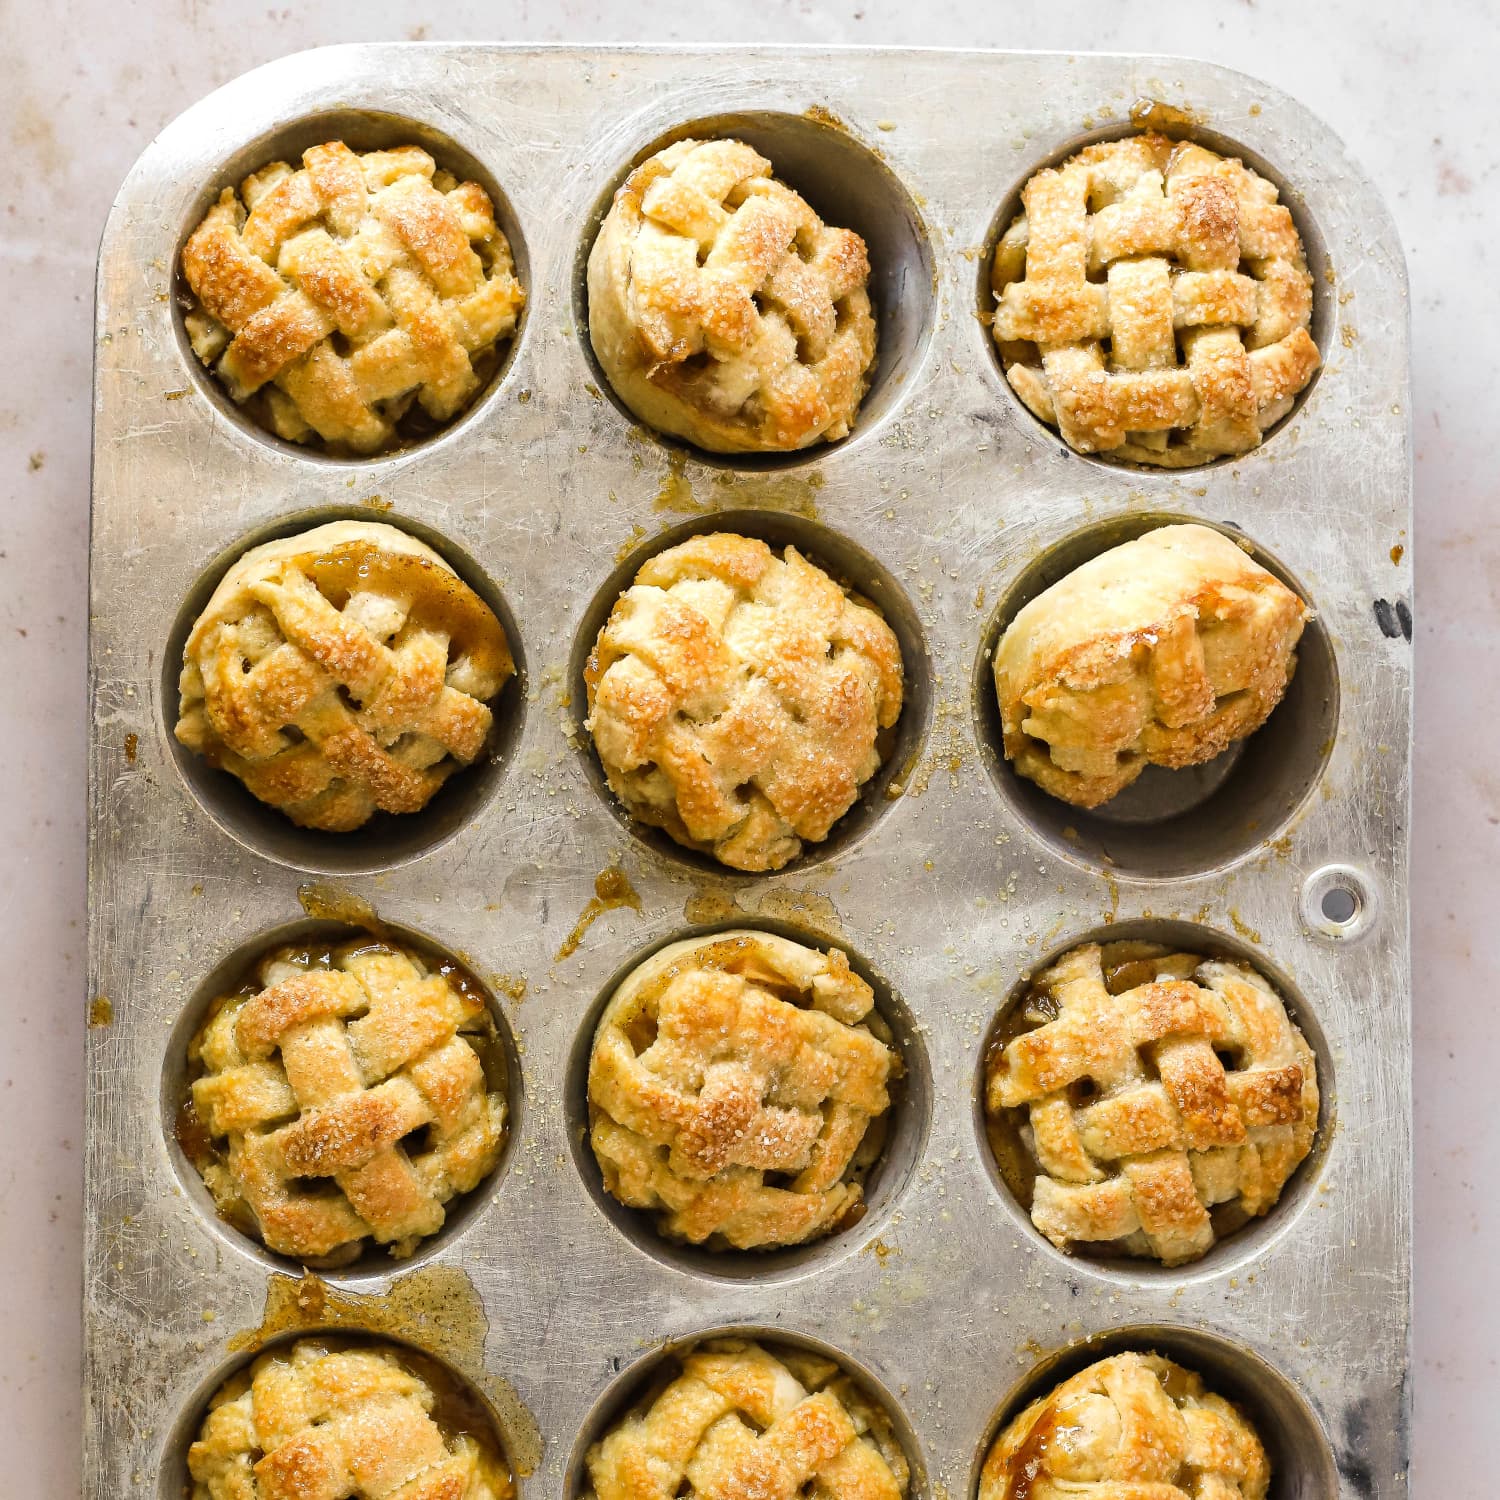 Mini Apple Pie Baking Kit  Includes Individual-Sized 5-Inch